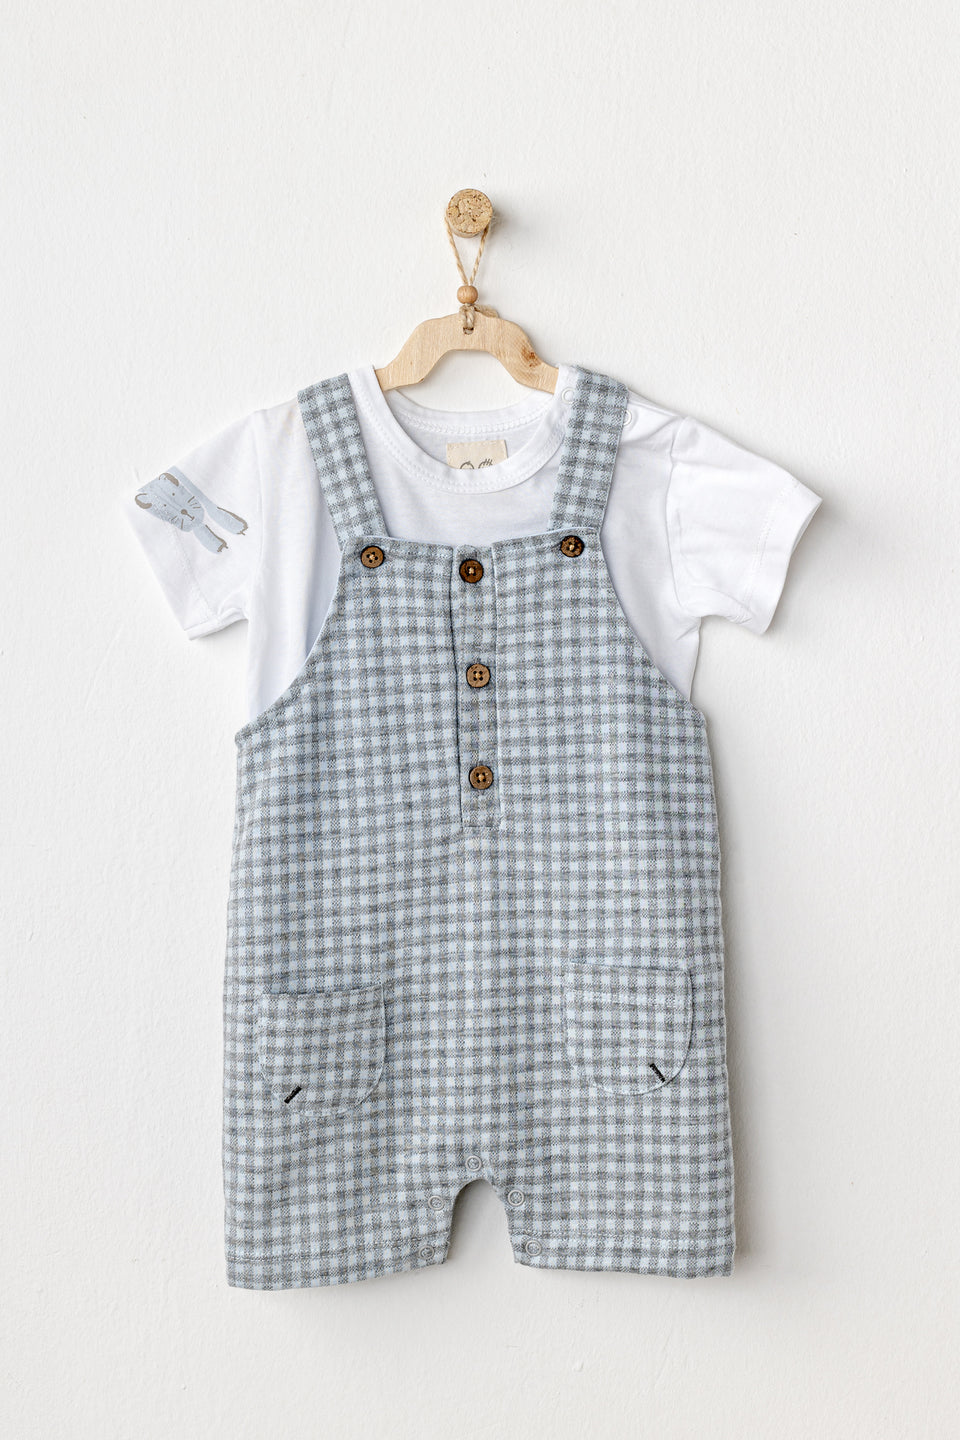 kids-atelier-andy-wawa-baby-boy-blue-safari-plaid-overalls-outfit-ac24604